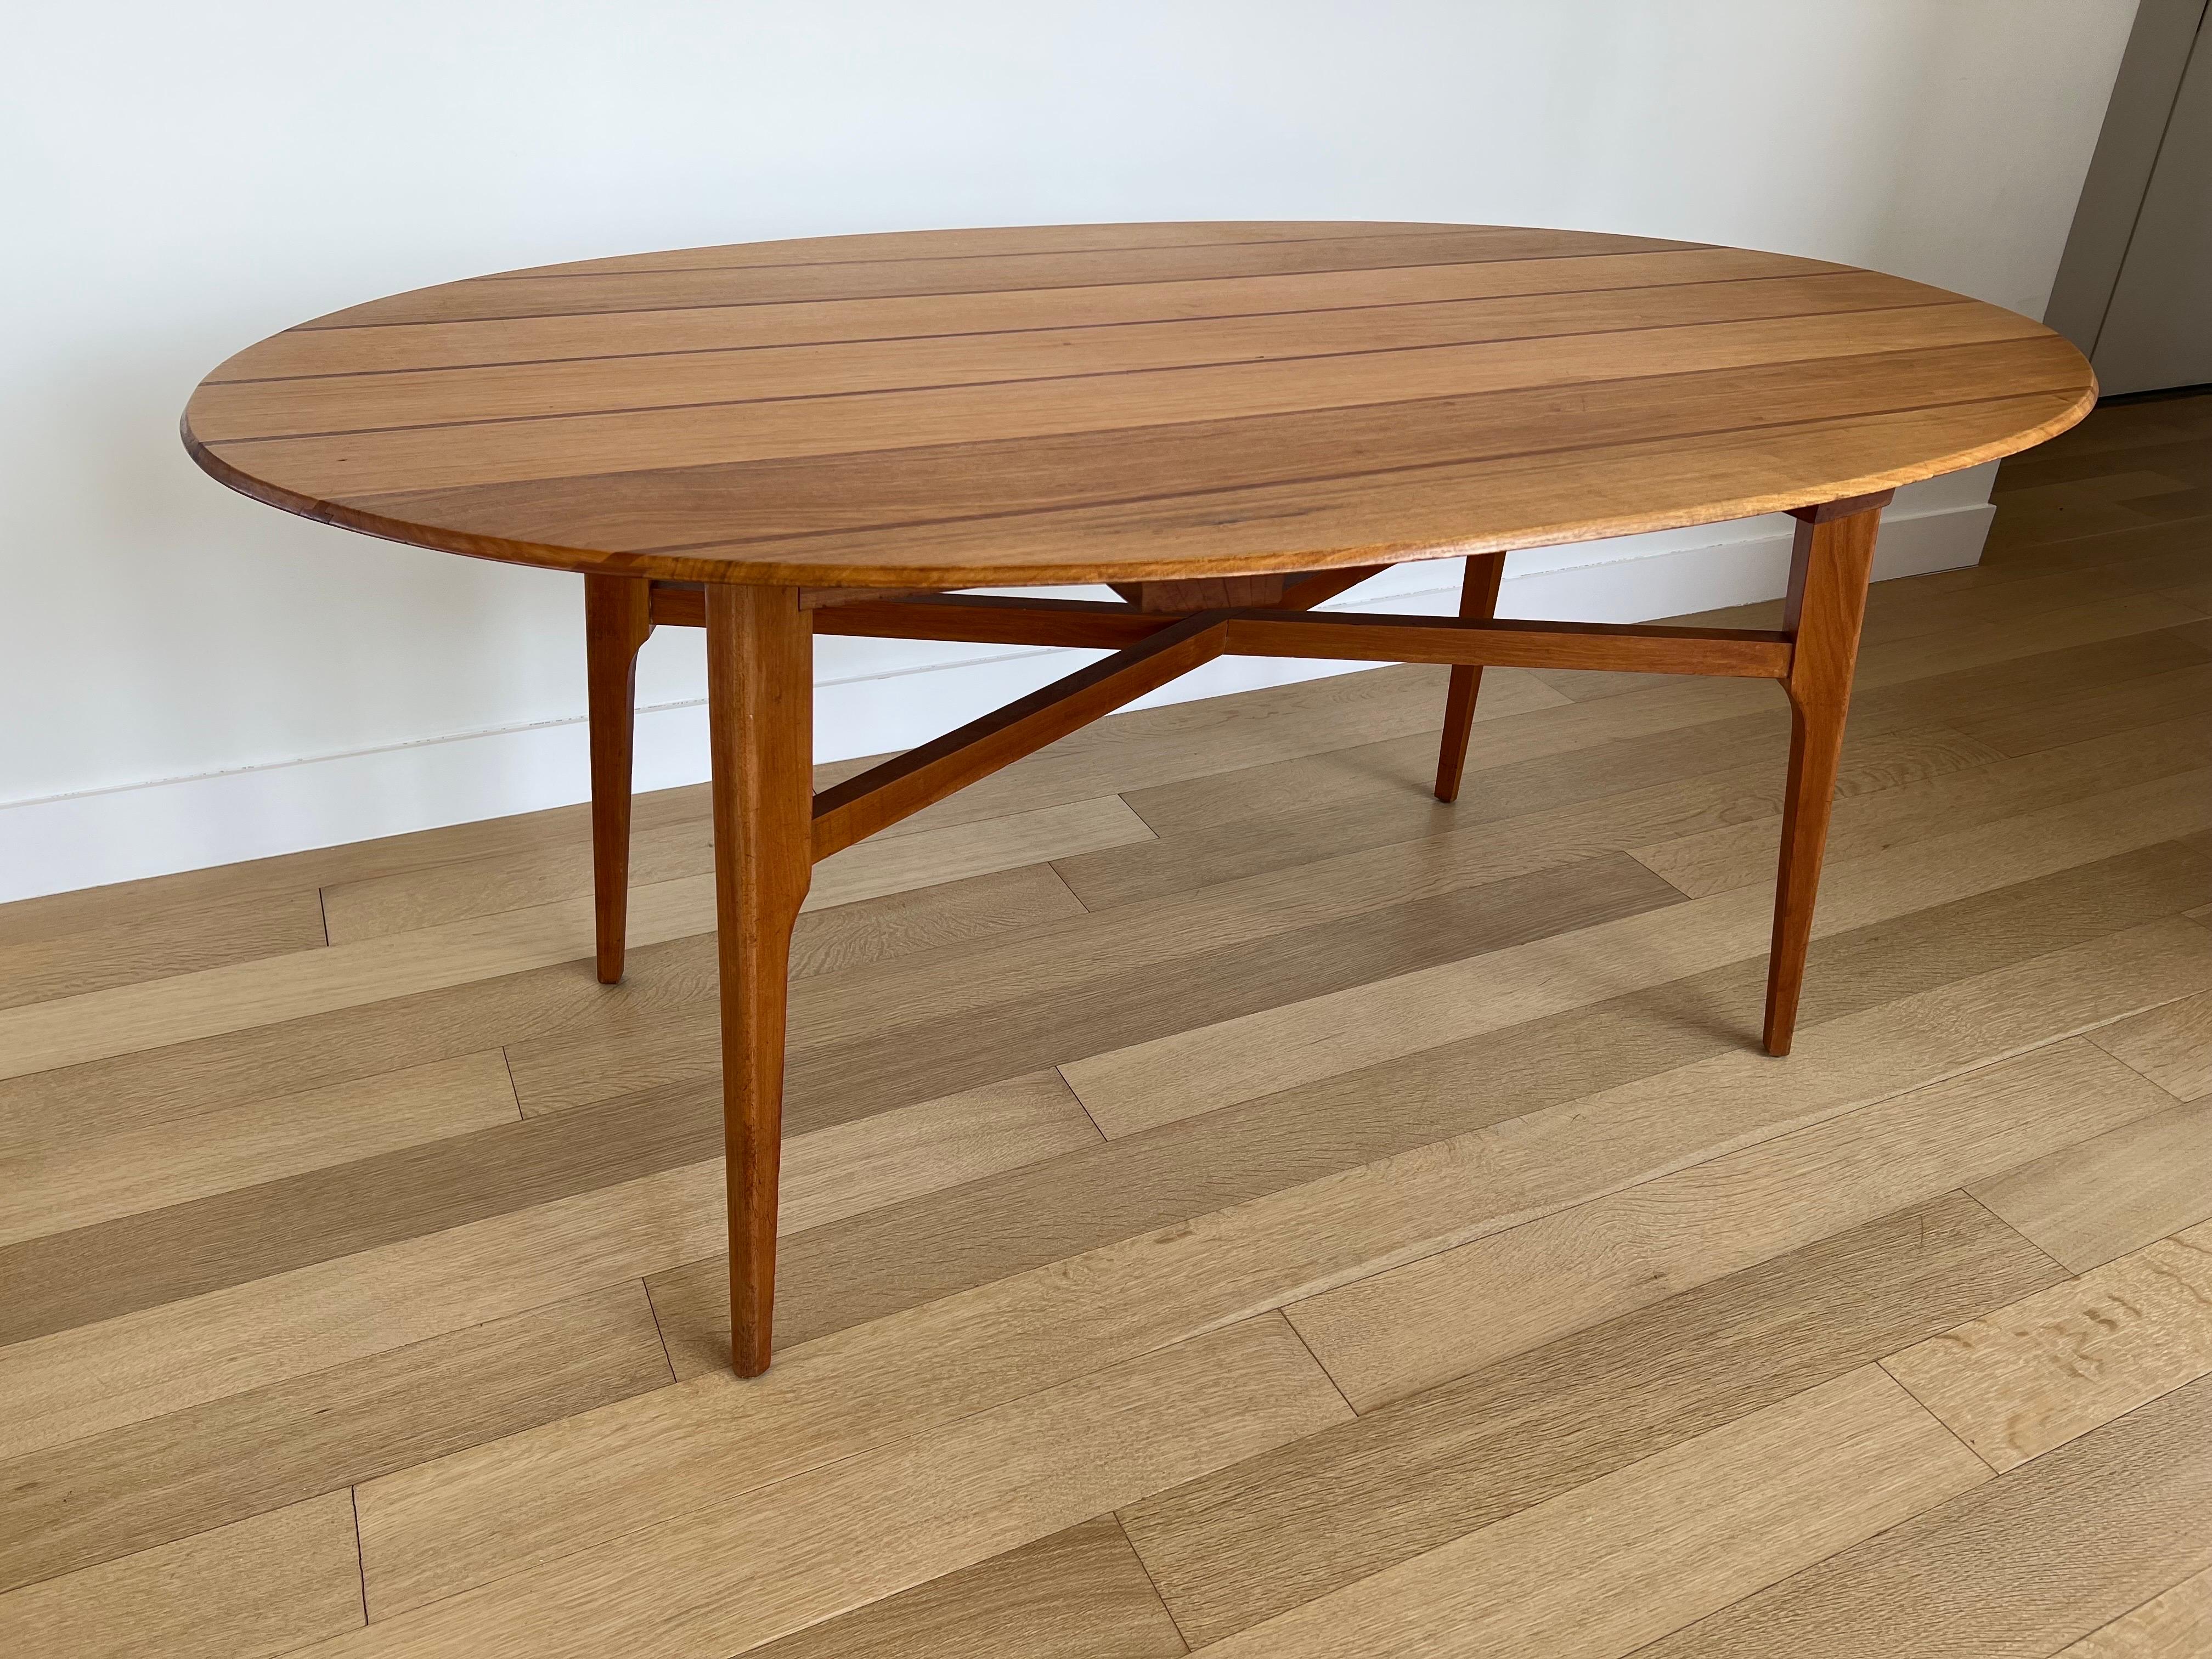 An interesting and unique elliptical dining table by Frank Guille. Oval shaped top with teak and wood joinery inlay and beveled edge.